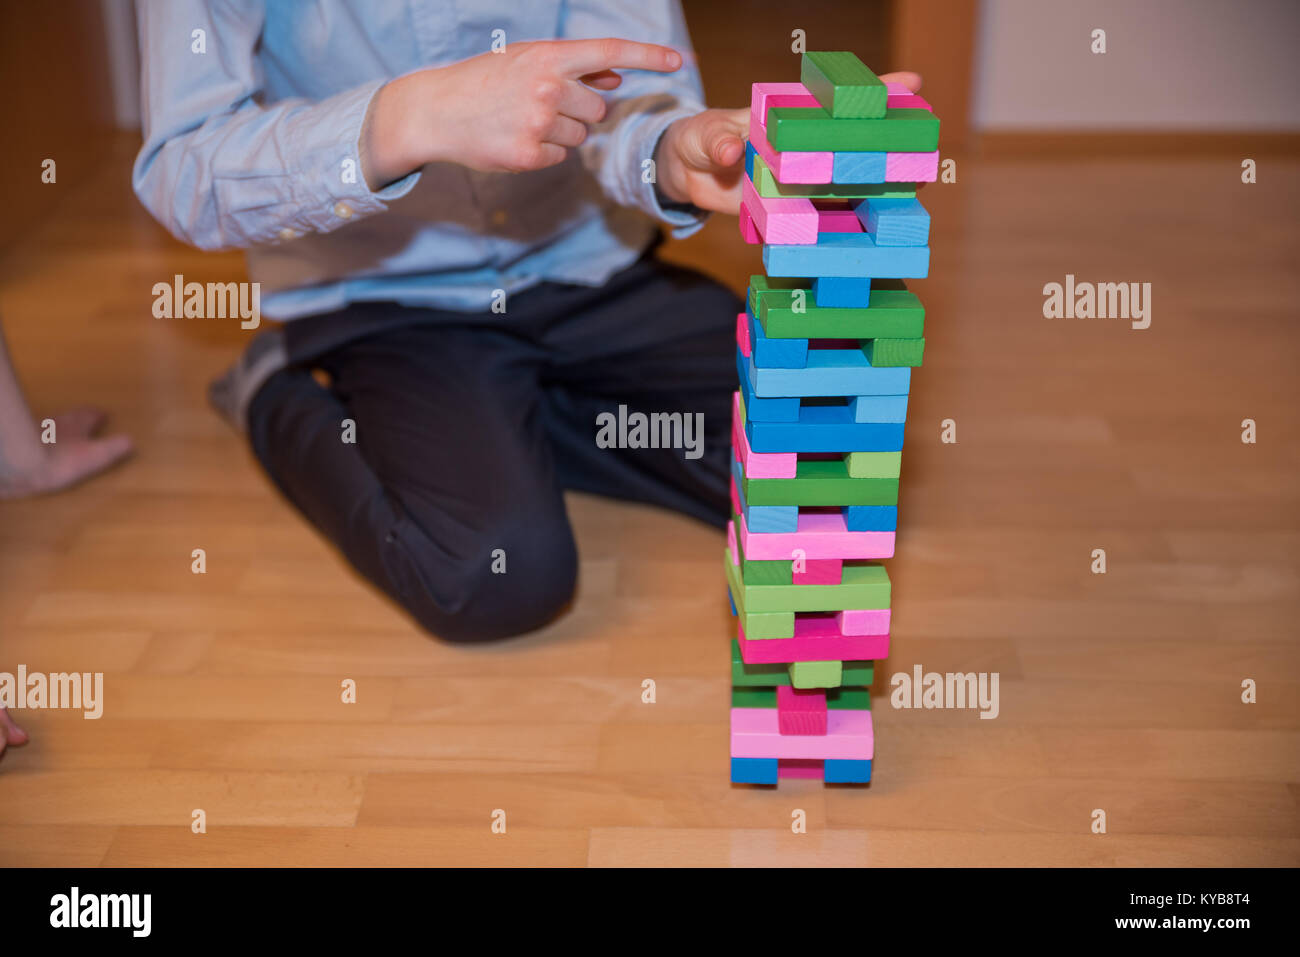 Child trying to take out a component of a colorful Jenga aka Klodsmajor parlor game, a social game in which you build a tower of wooden pieces until i Stock Photo